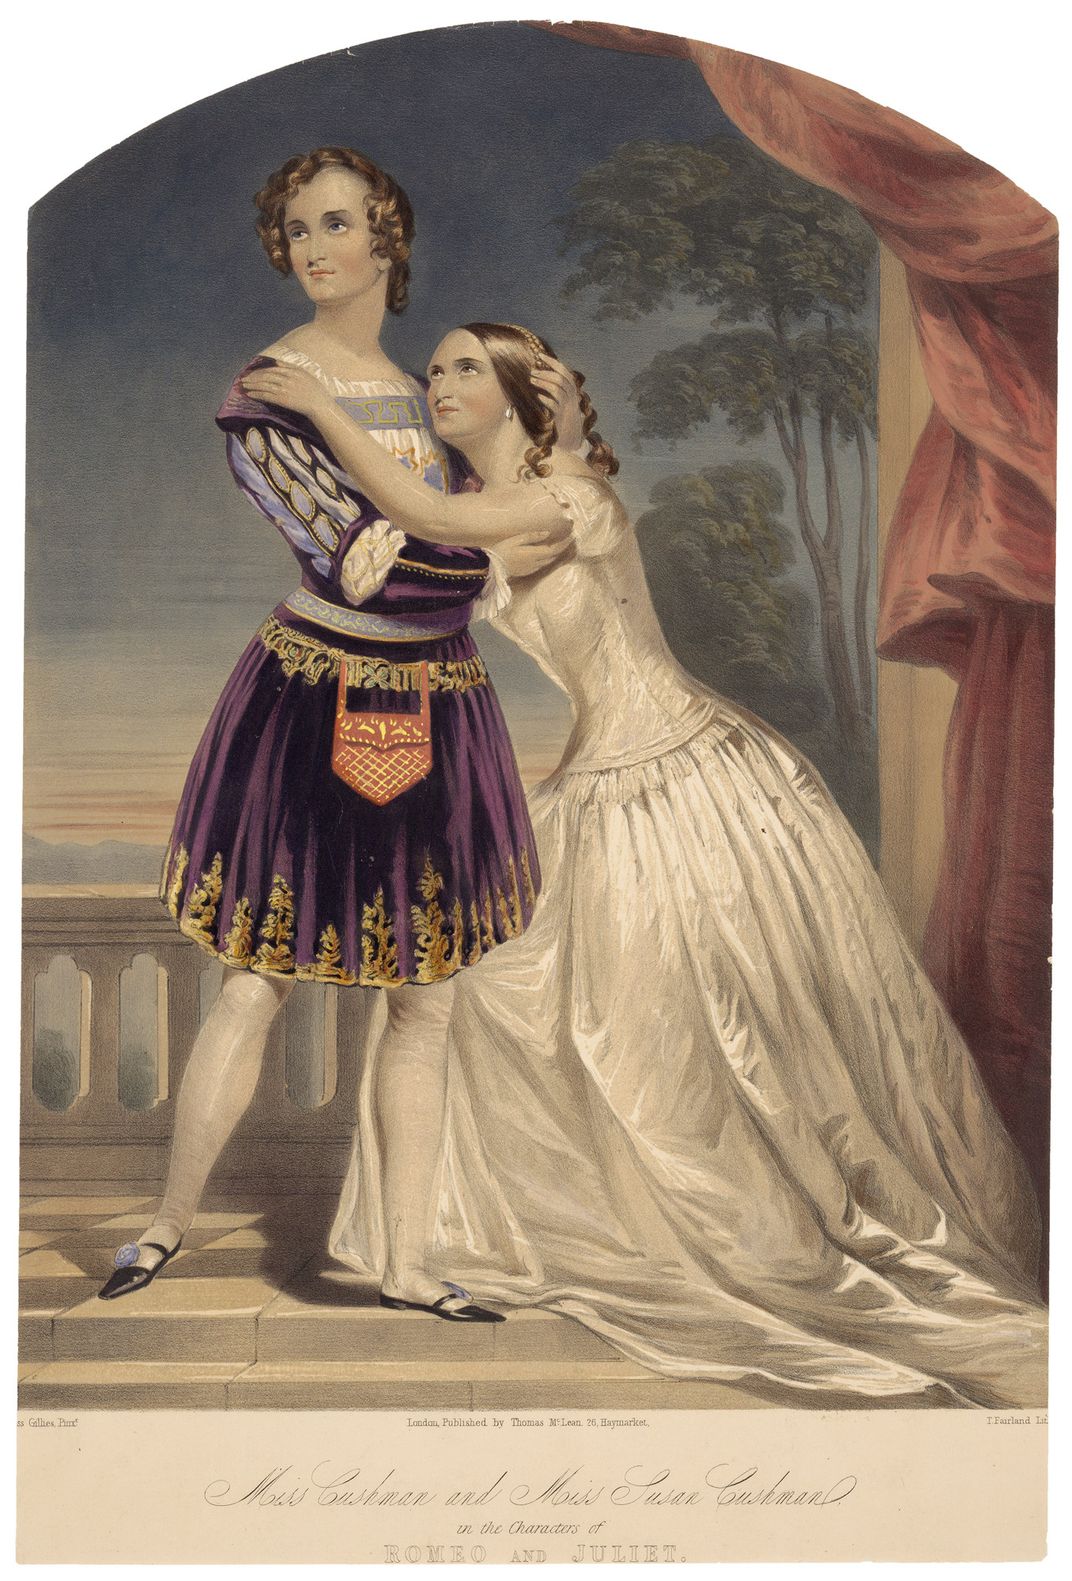 Charlotte and Susan Cushman as Romeo and Juliet